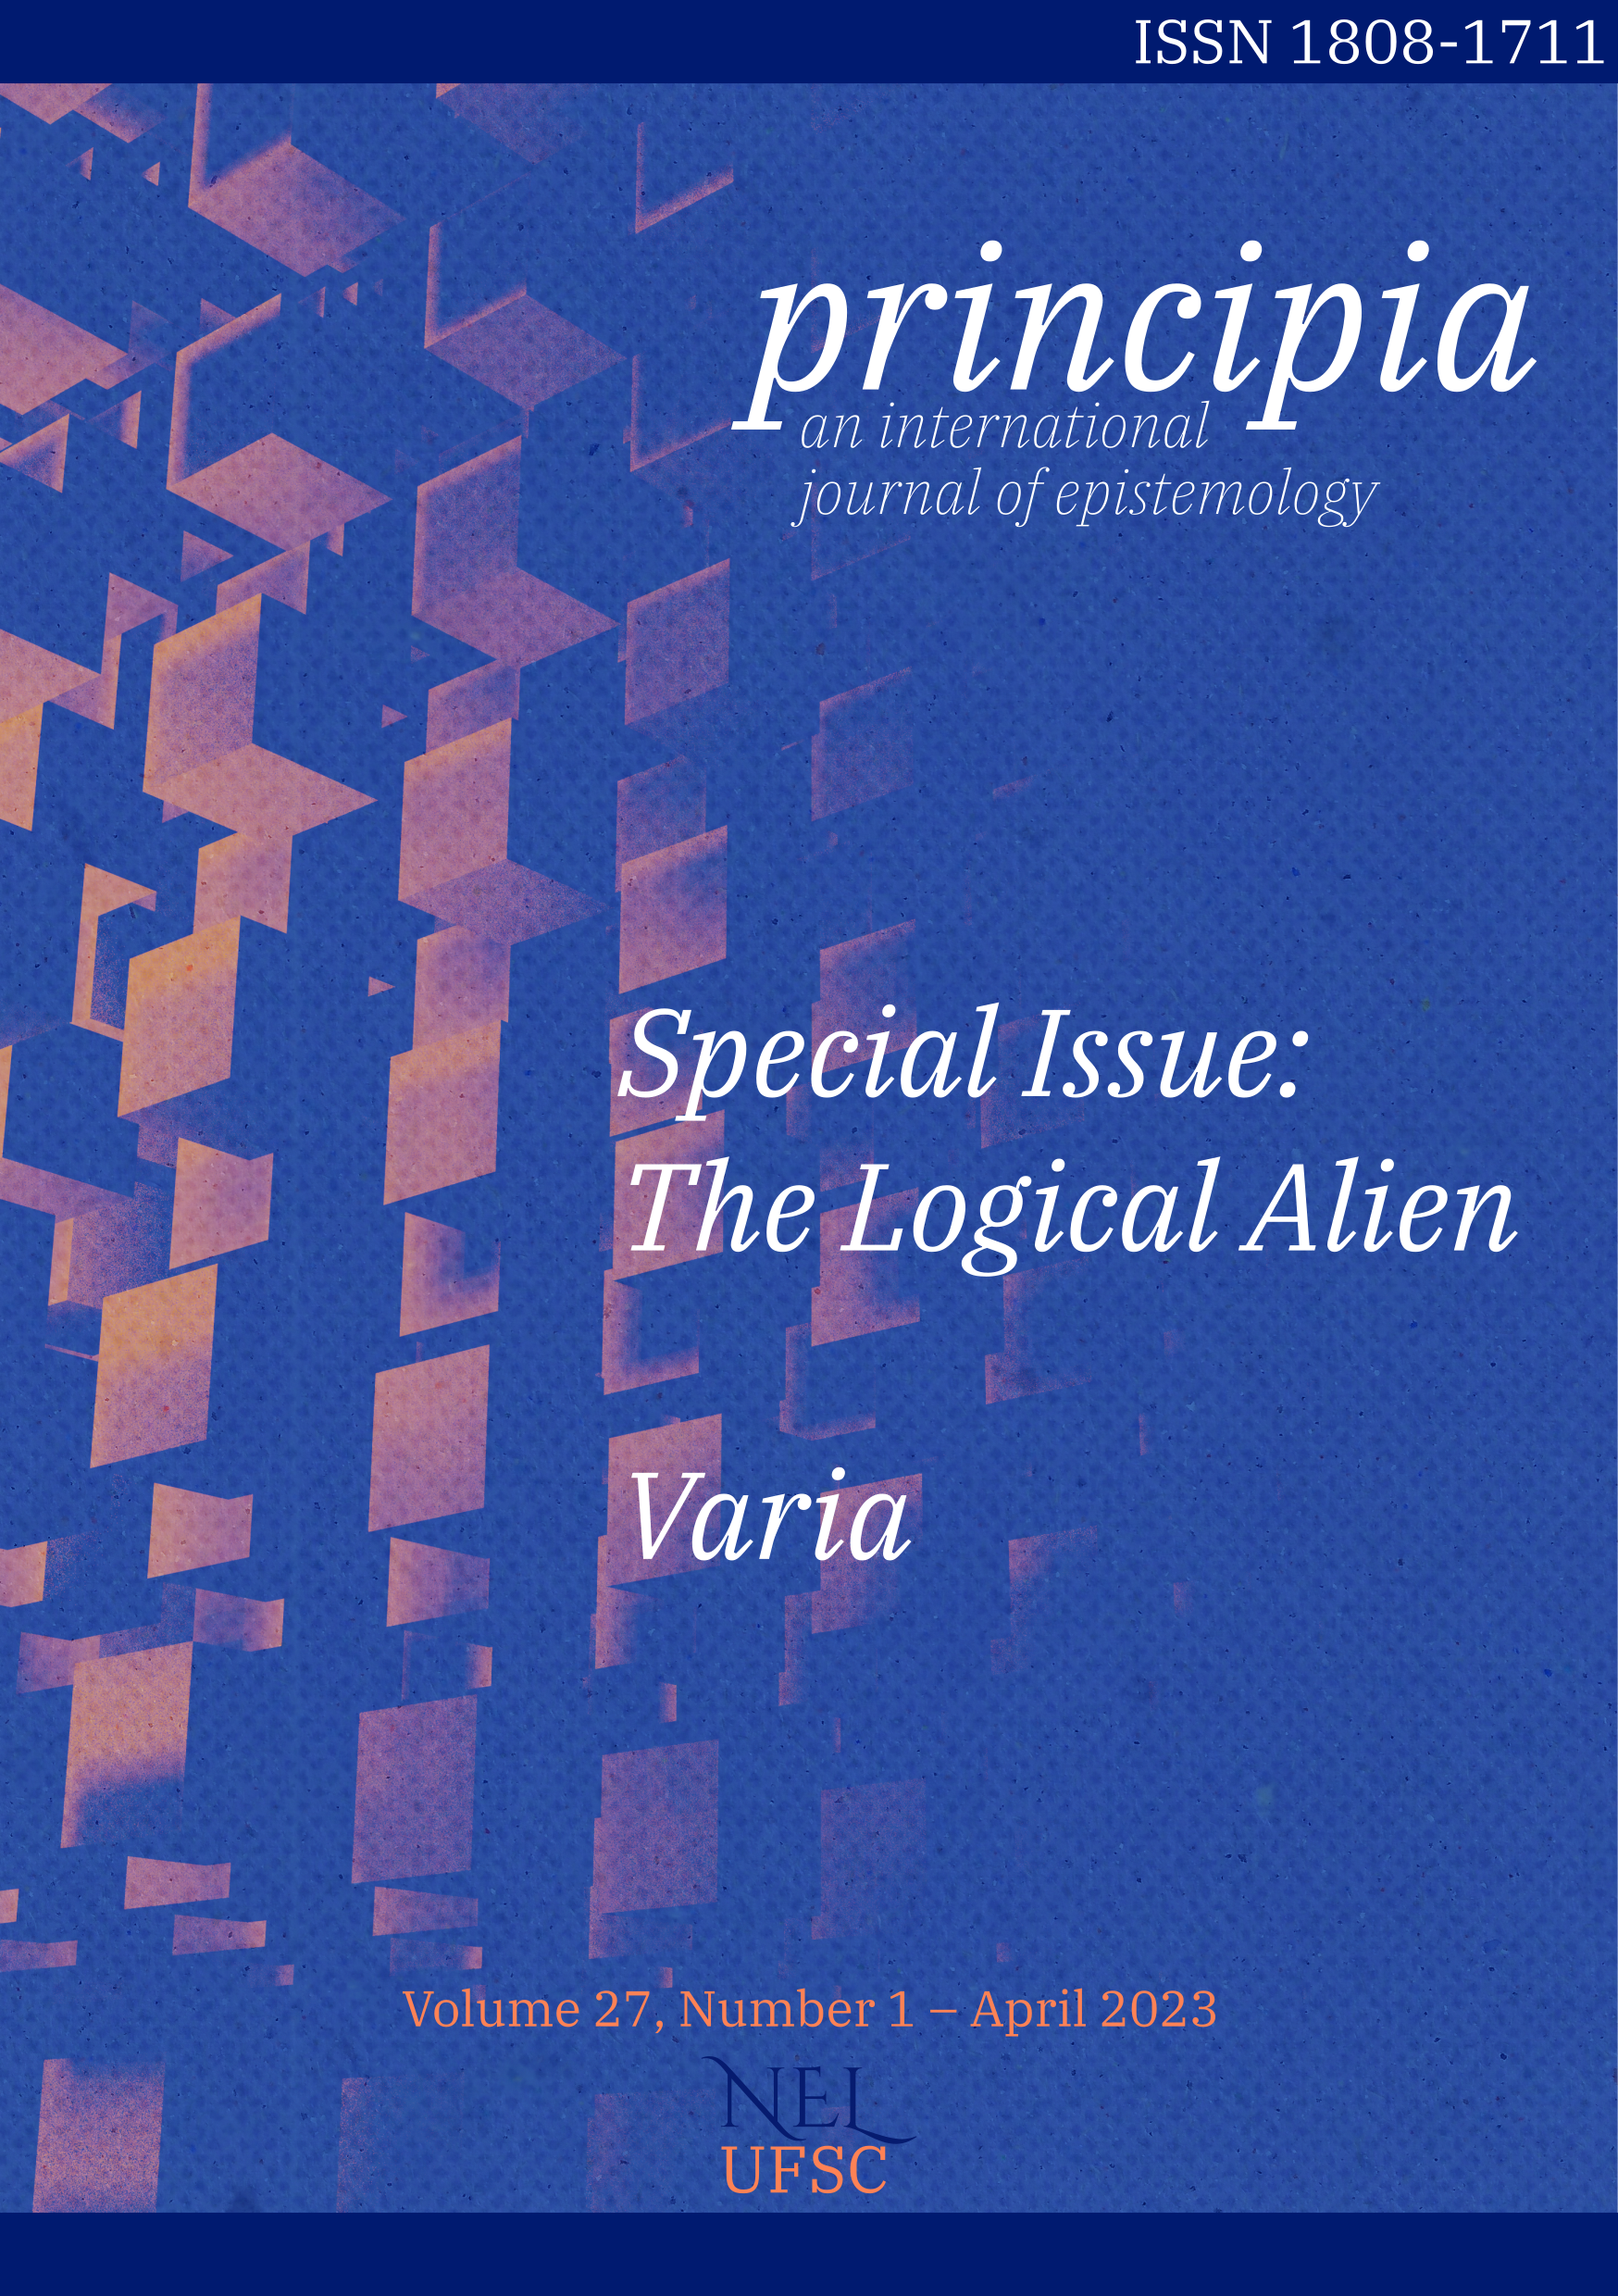 					View Vol. 27 No. 1 (2023): Special Issue: The Logical Alien + Varia
				